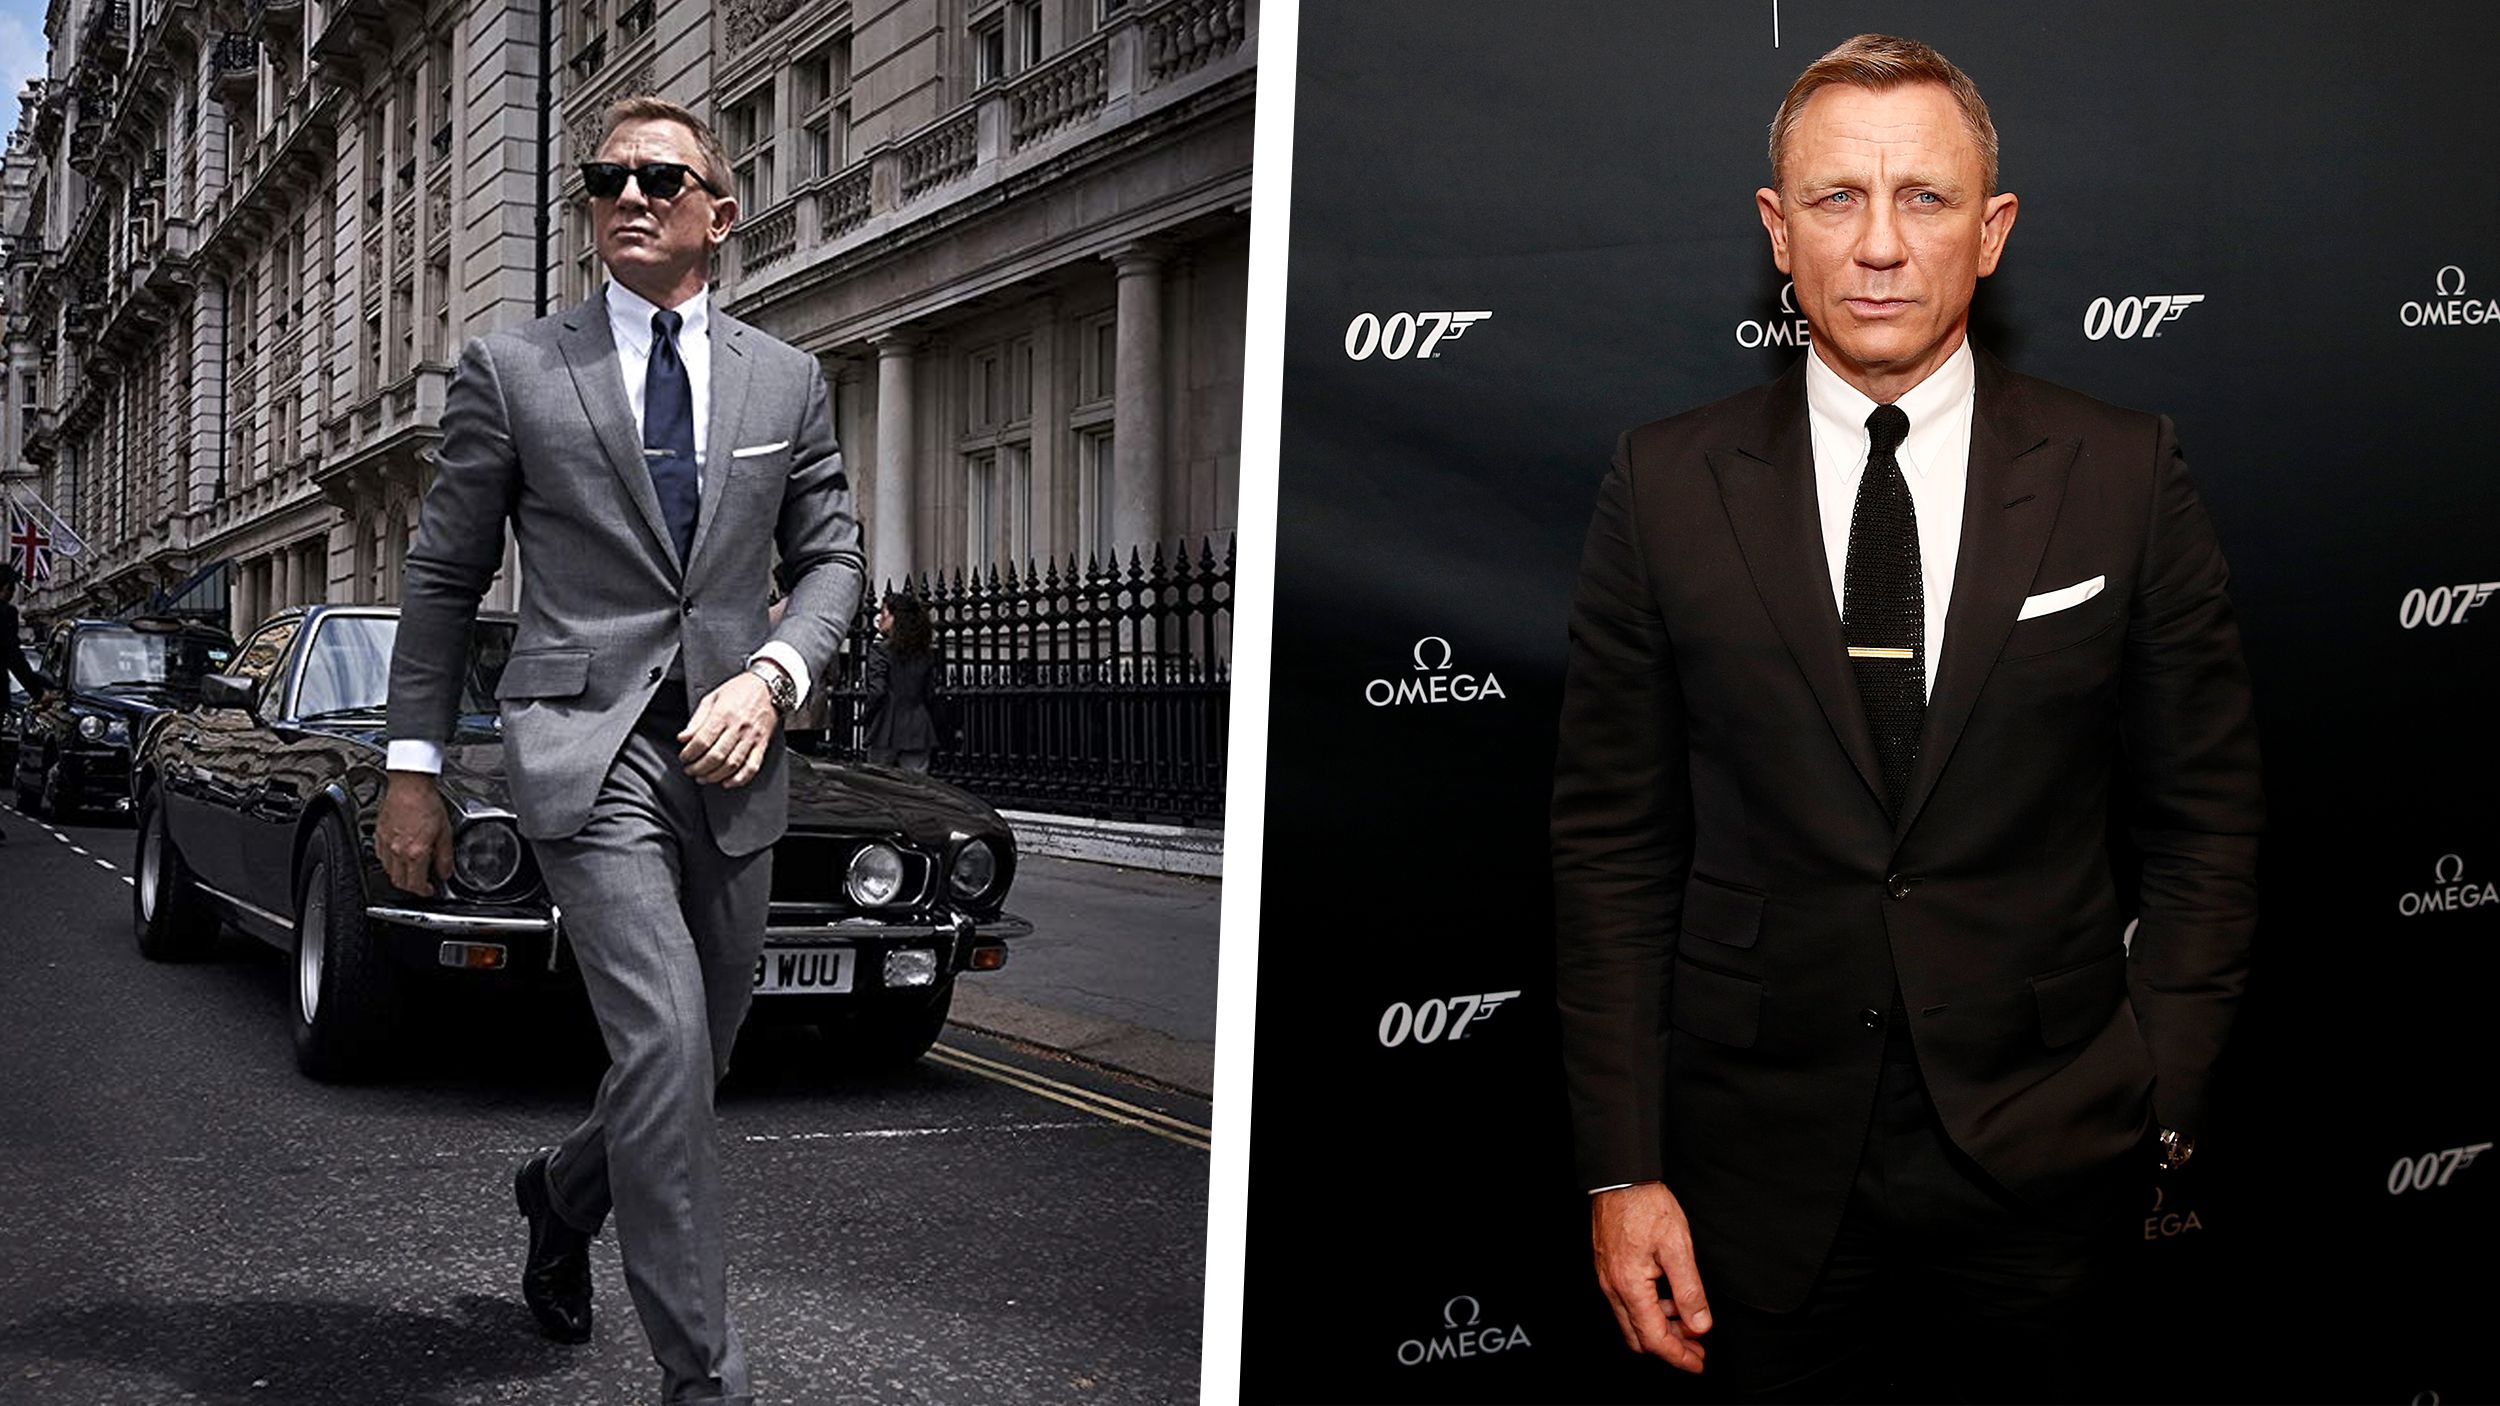 No Time to Die: How to Dress Like Daniel Craig as James Bond With 007 Style